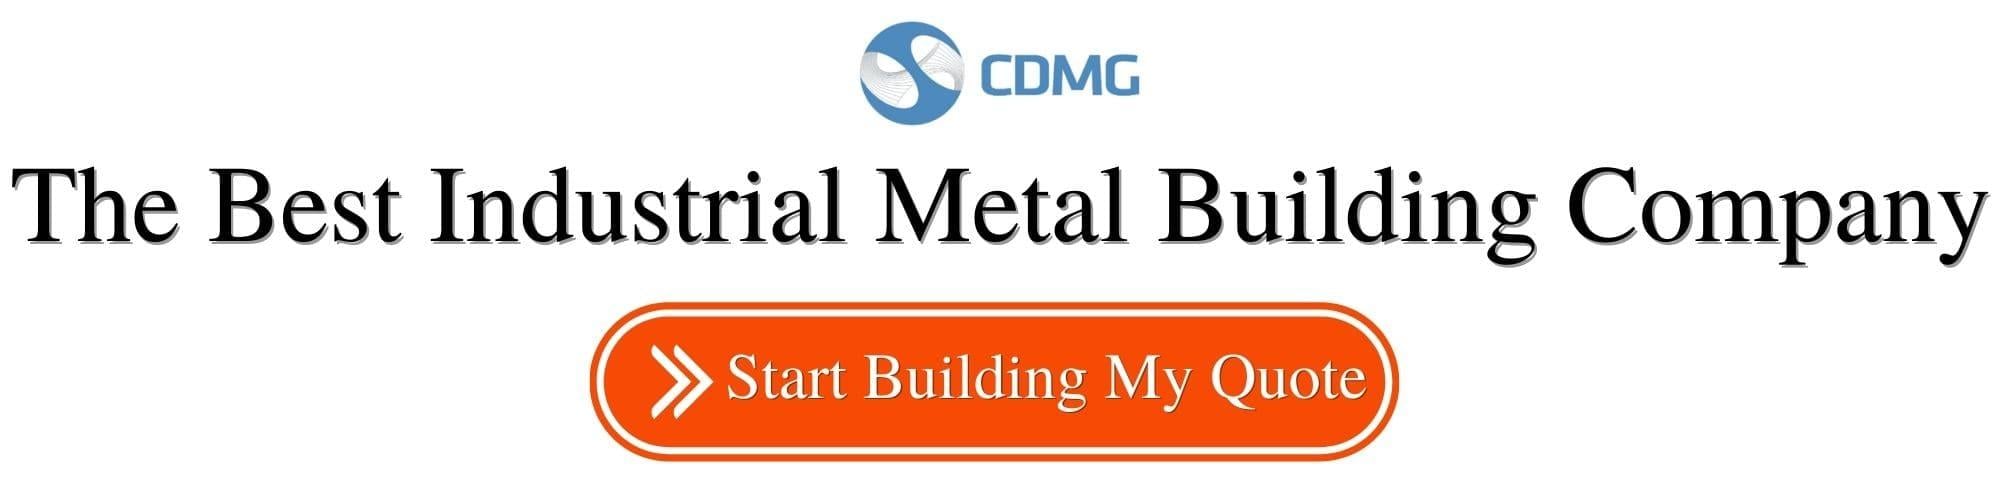 get-your-pre-engineered-steel-building-quote-with-cdmg